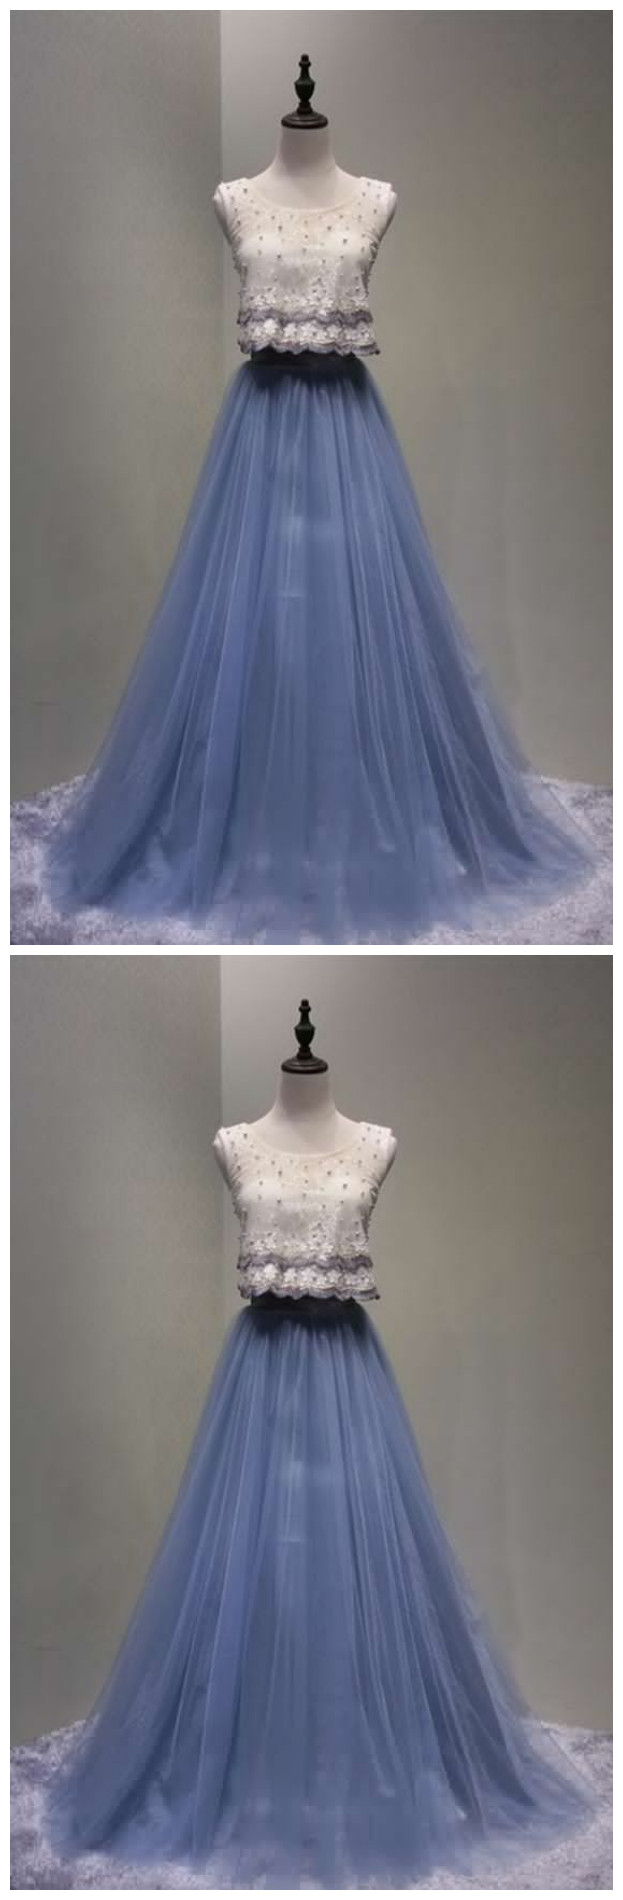 The Bride Beautiful Blue Skirt For A Long Time A - Ligne Night Party! Sleeveless Act The Role Of Formal Plancher Lace - Longueur Prom Party Robe